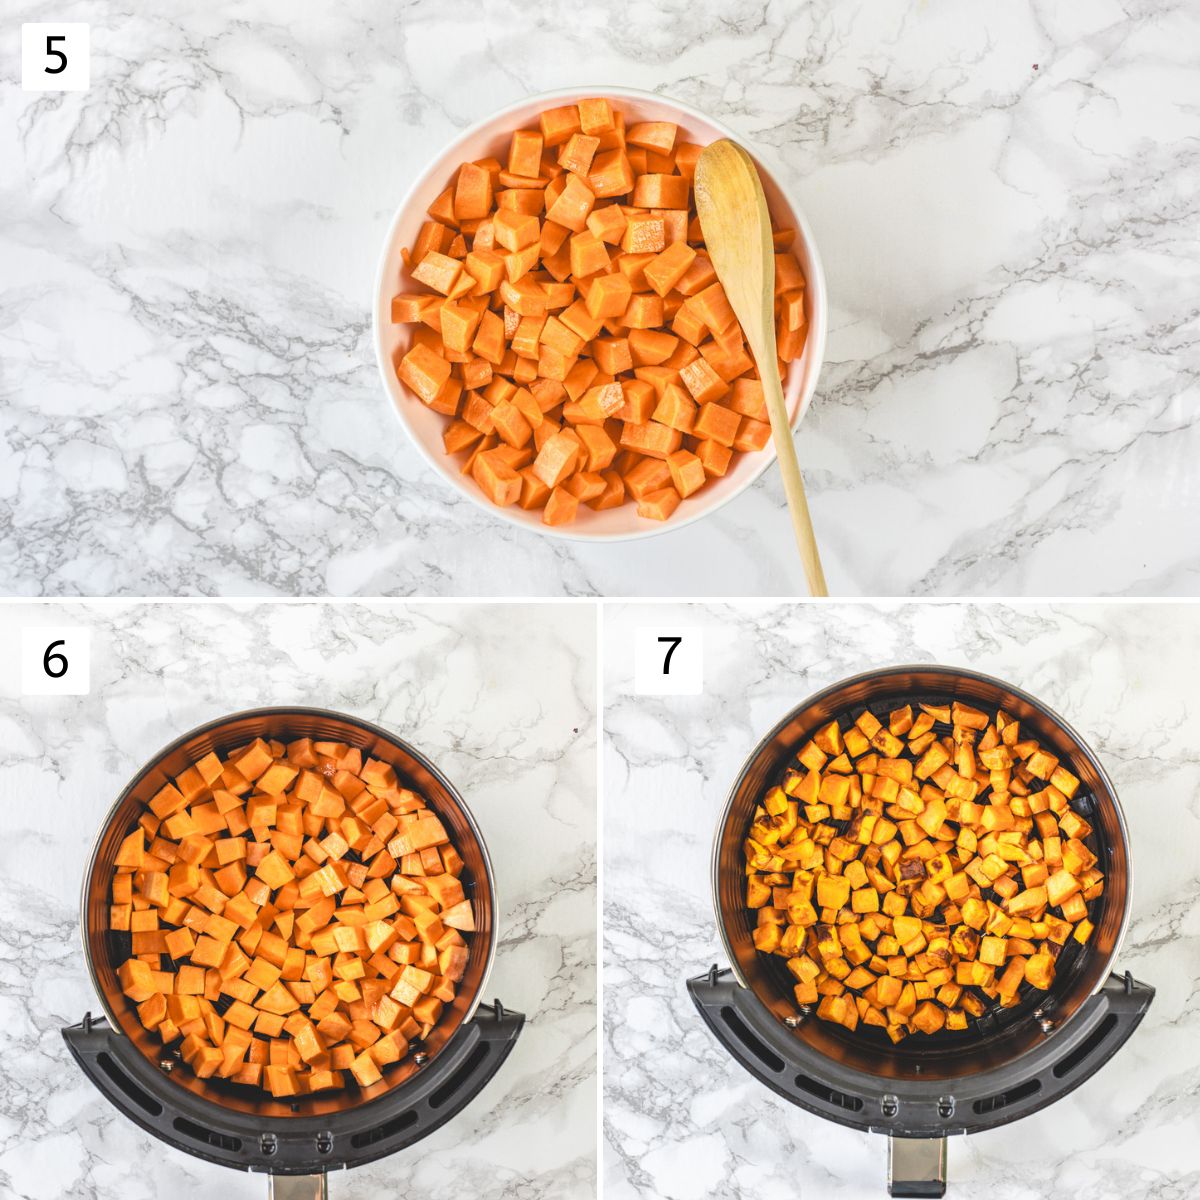 Collage of 3 images showing seasoning sweet potatoes and air frying.